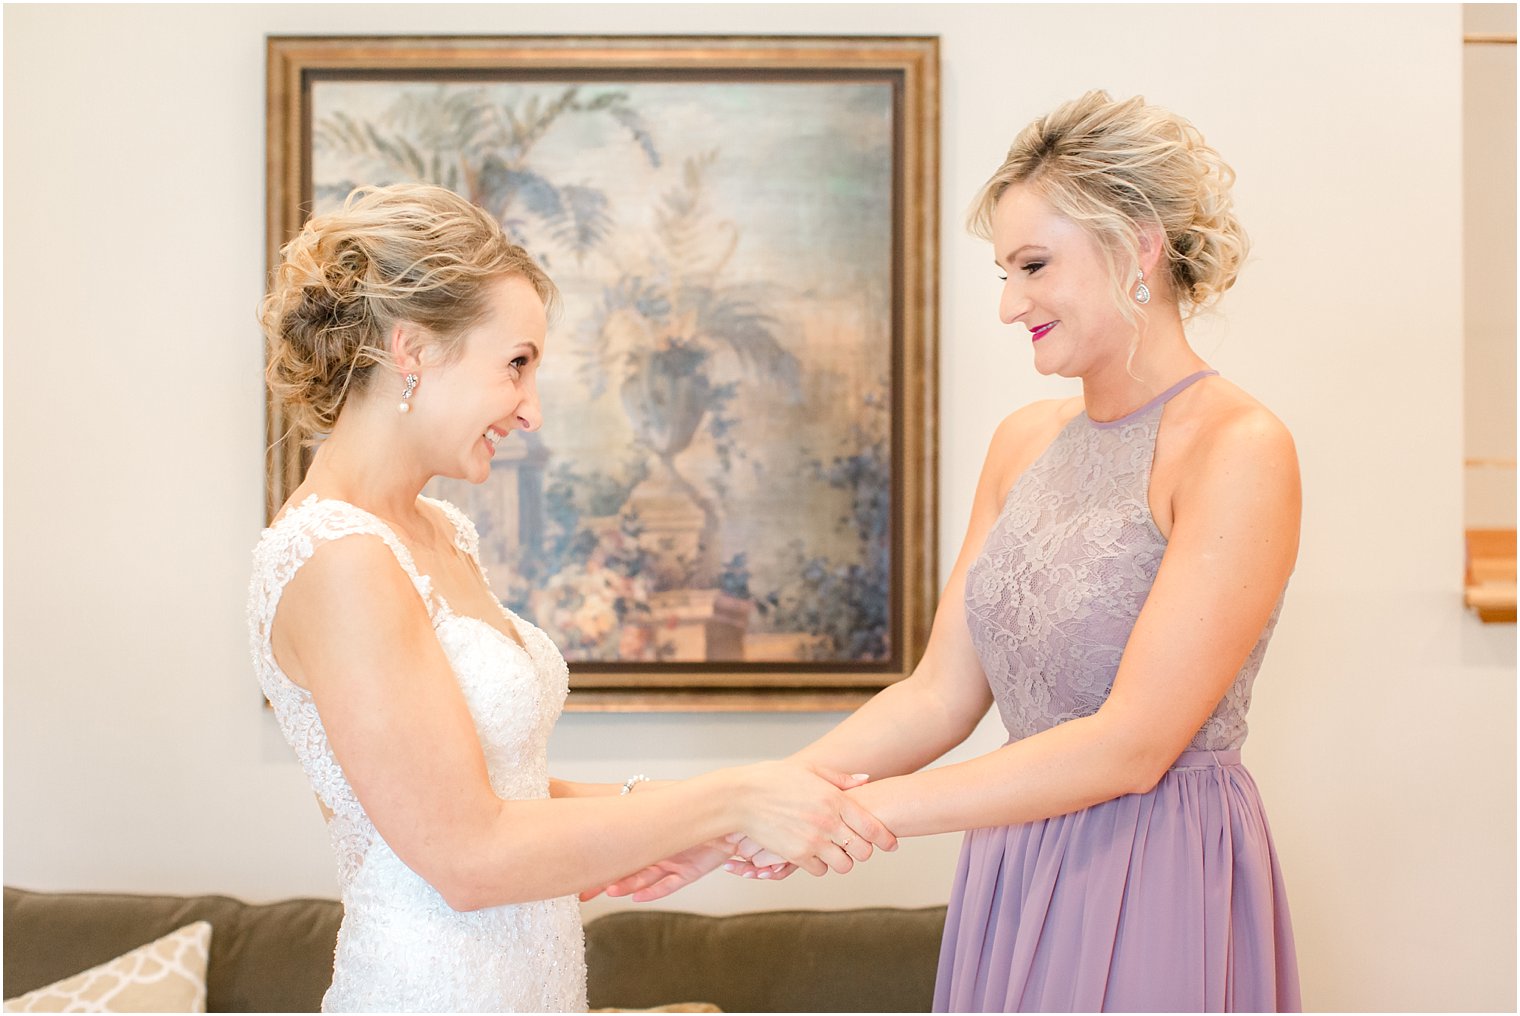 Bride and maid of honor getting ready on wedding day